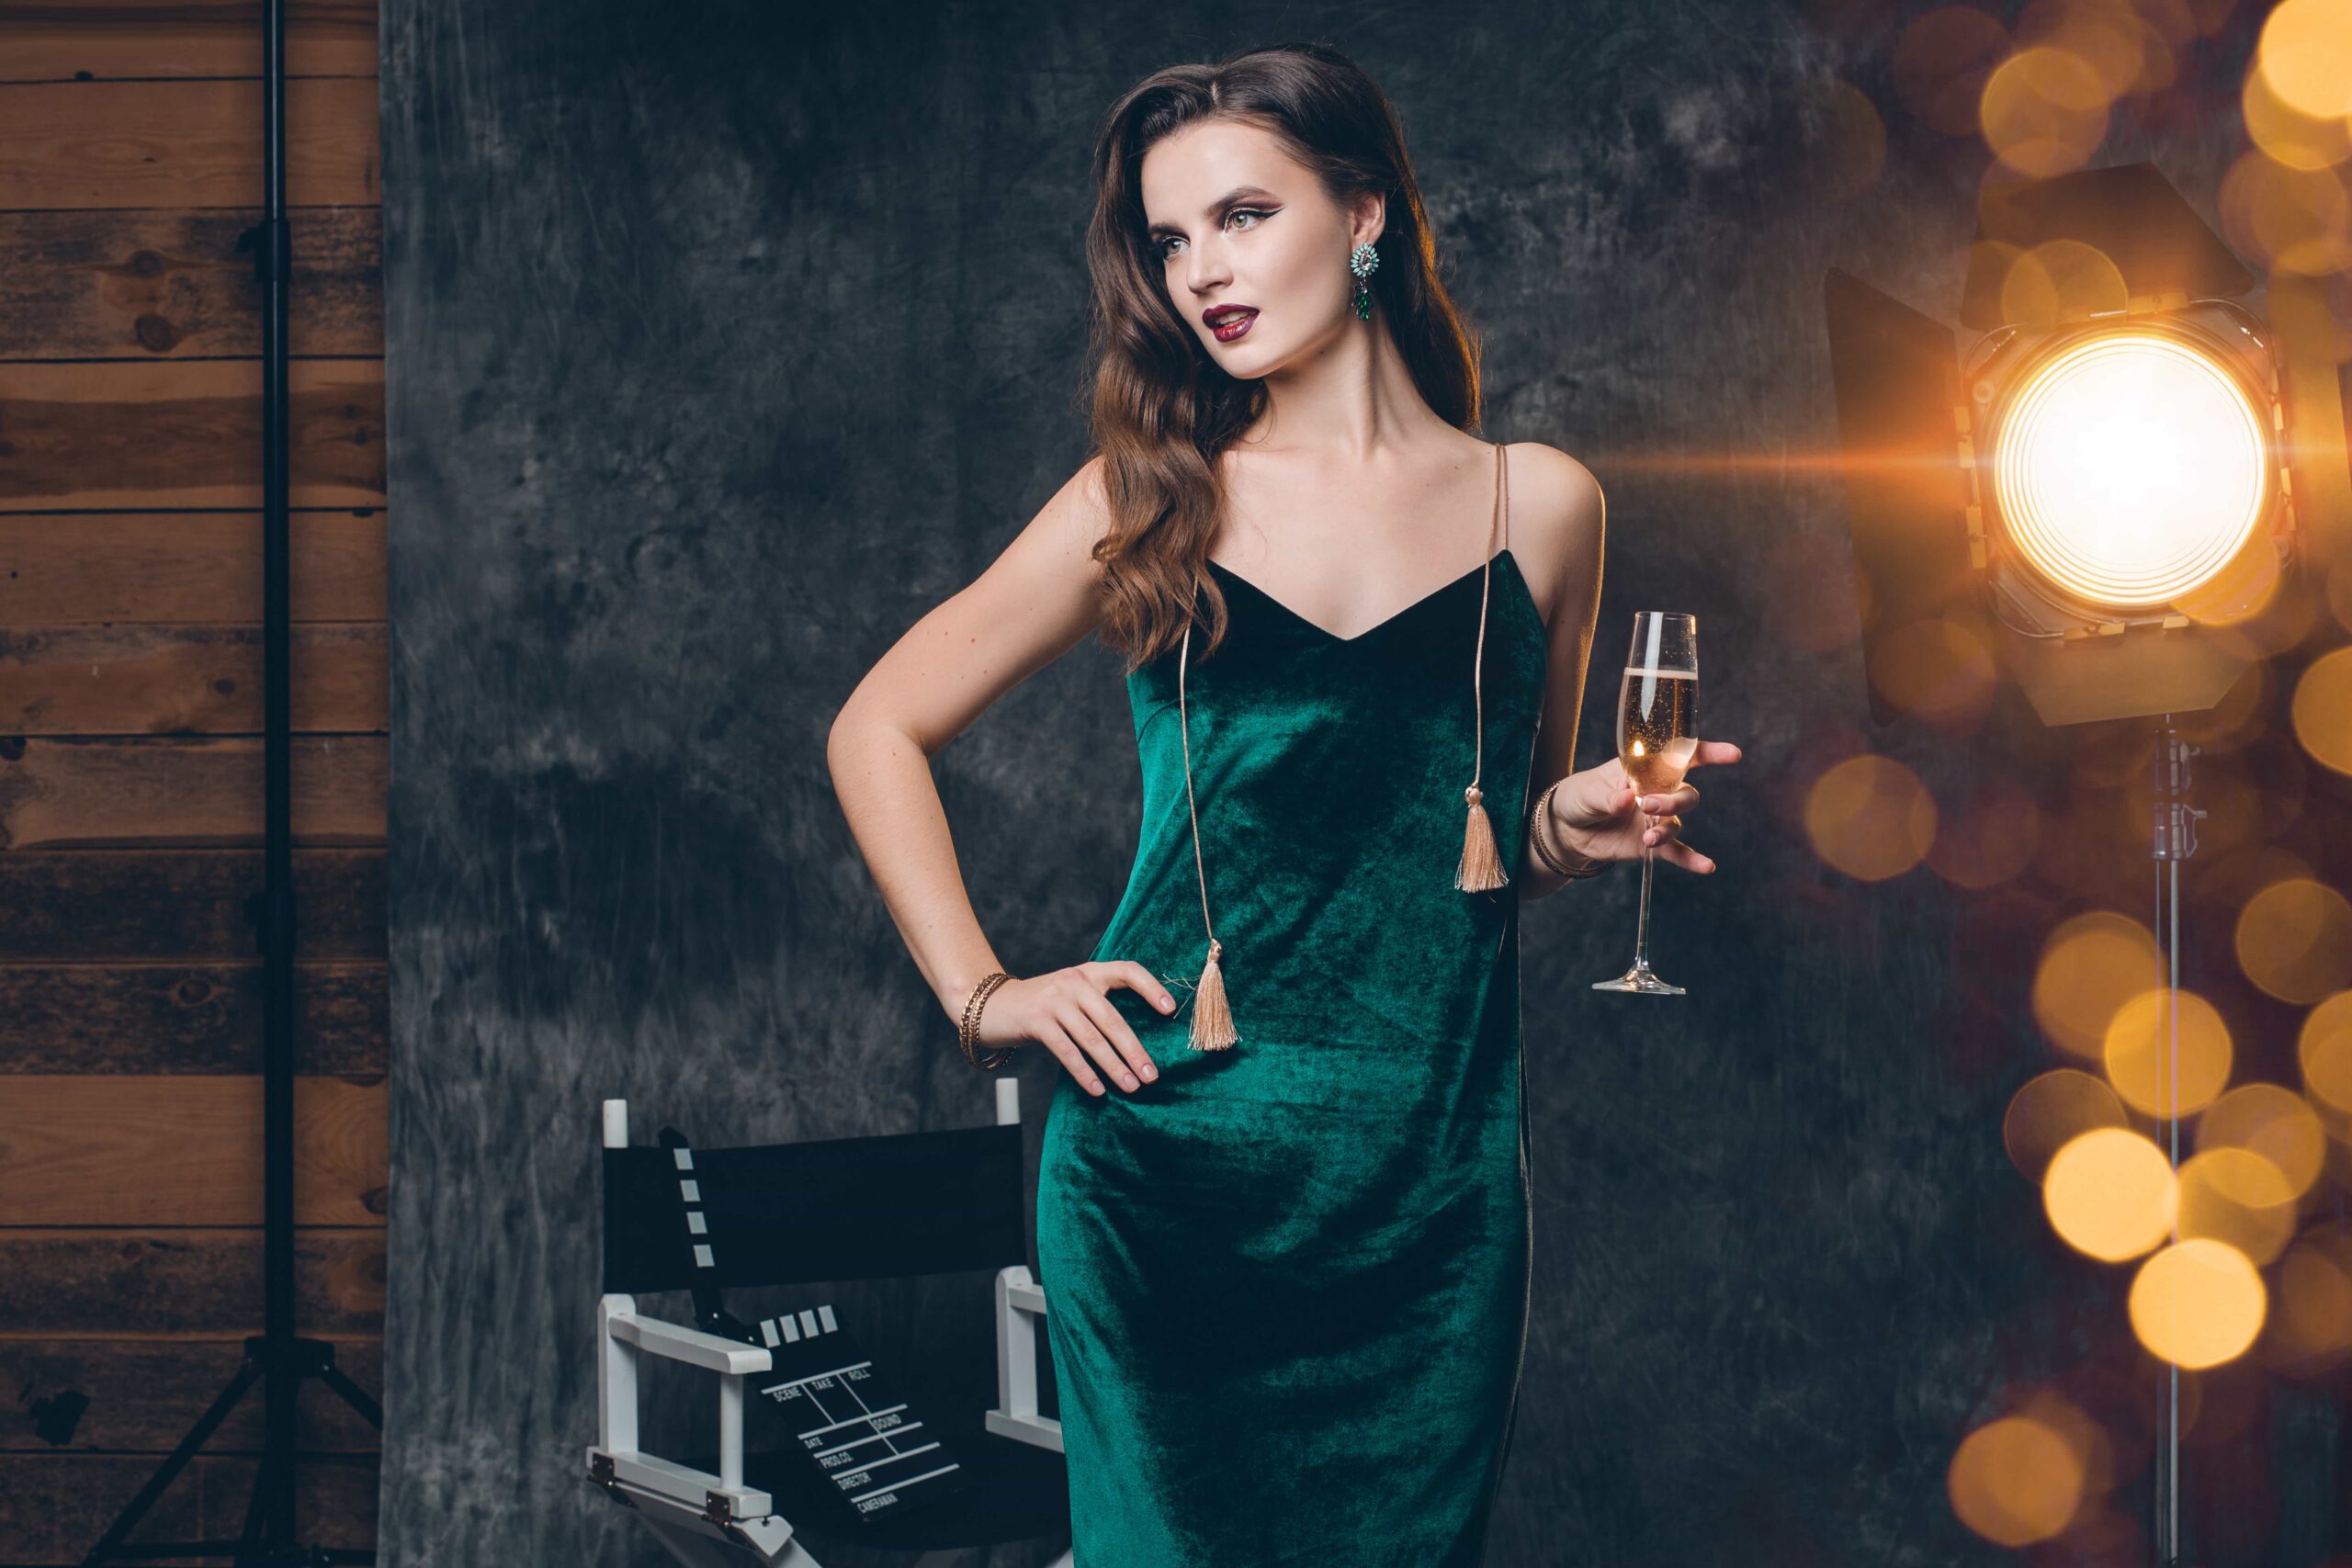 Woman in a green dress holding a glass of Champagne